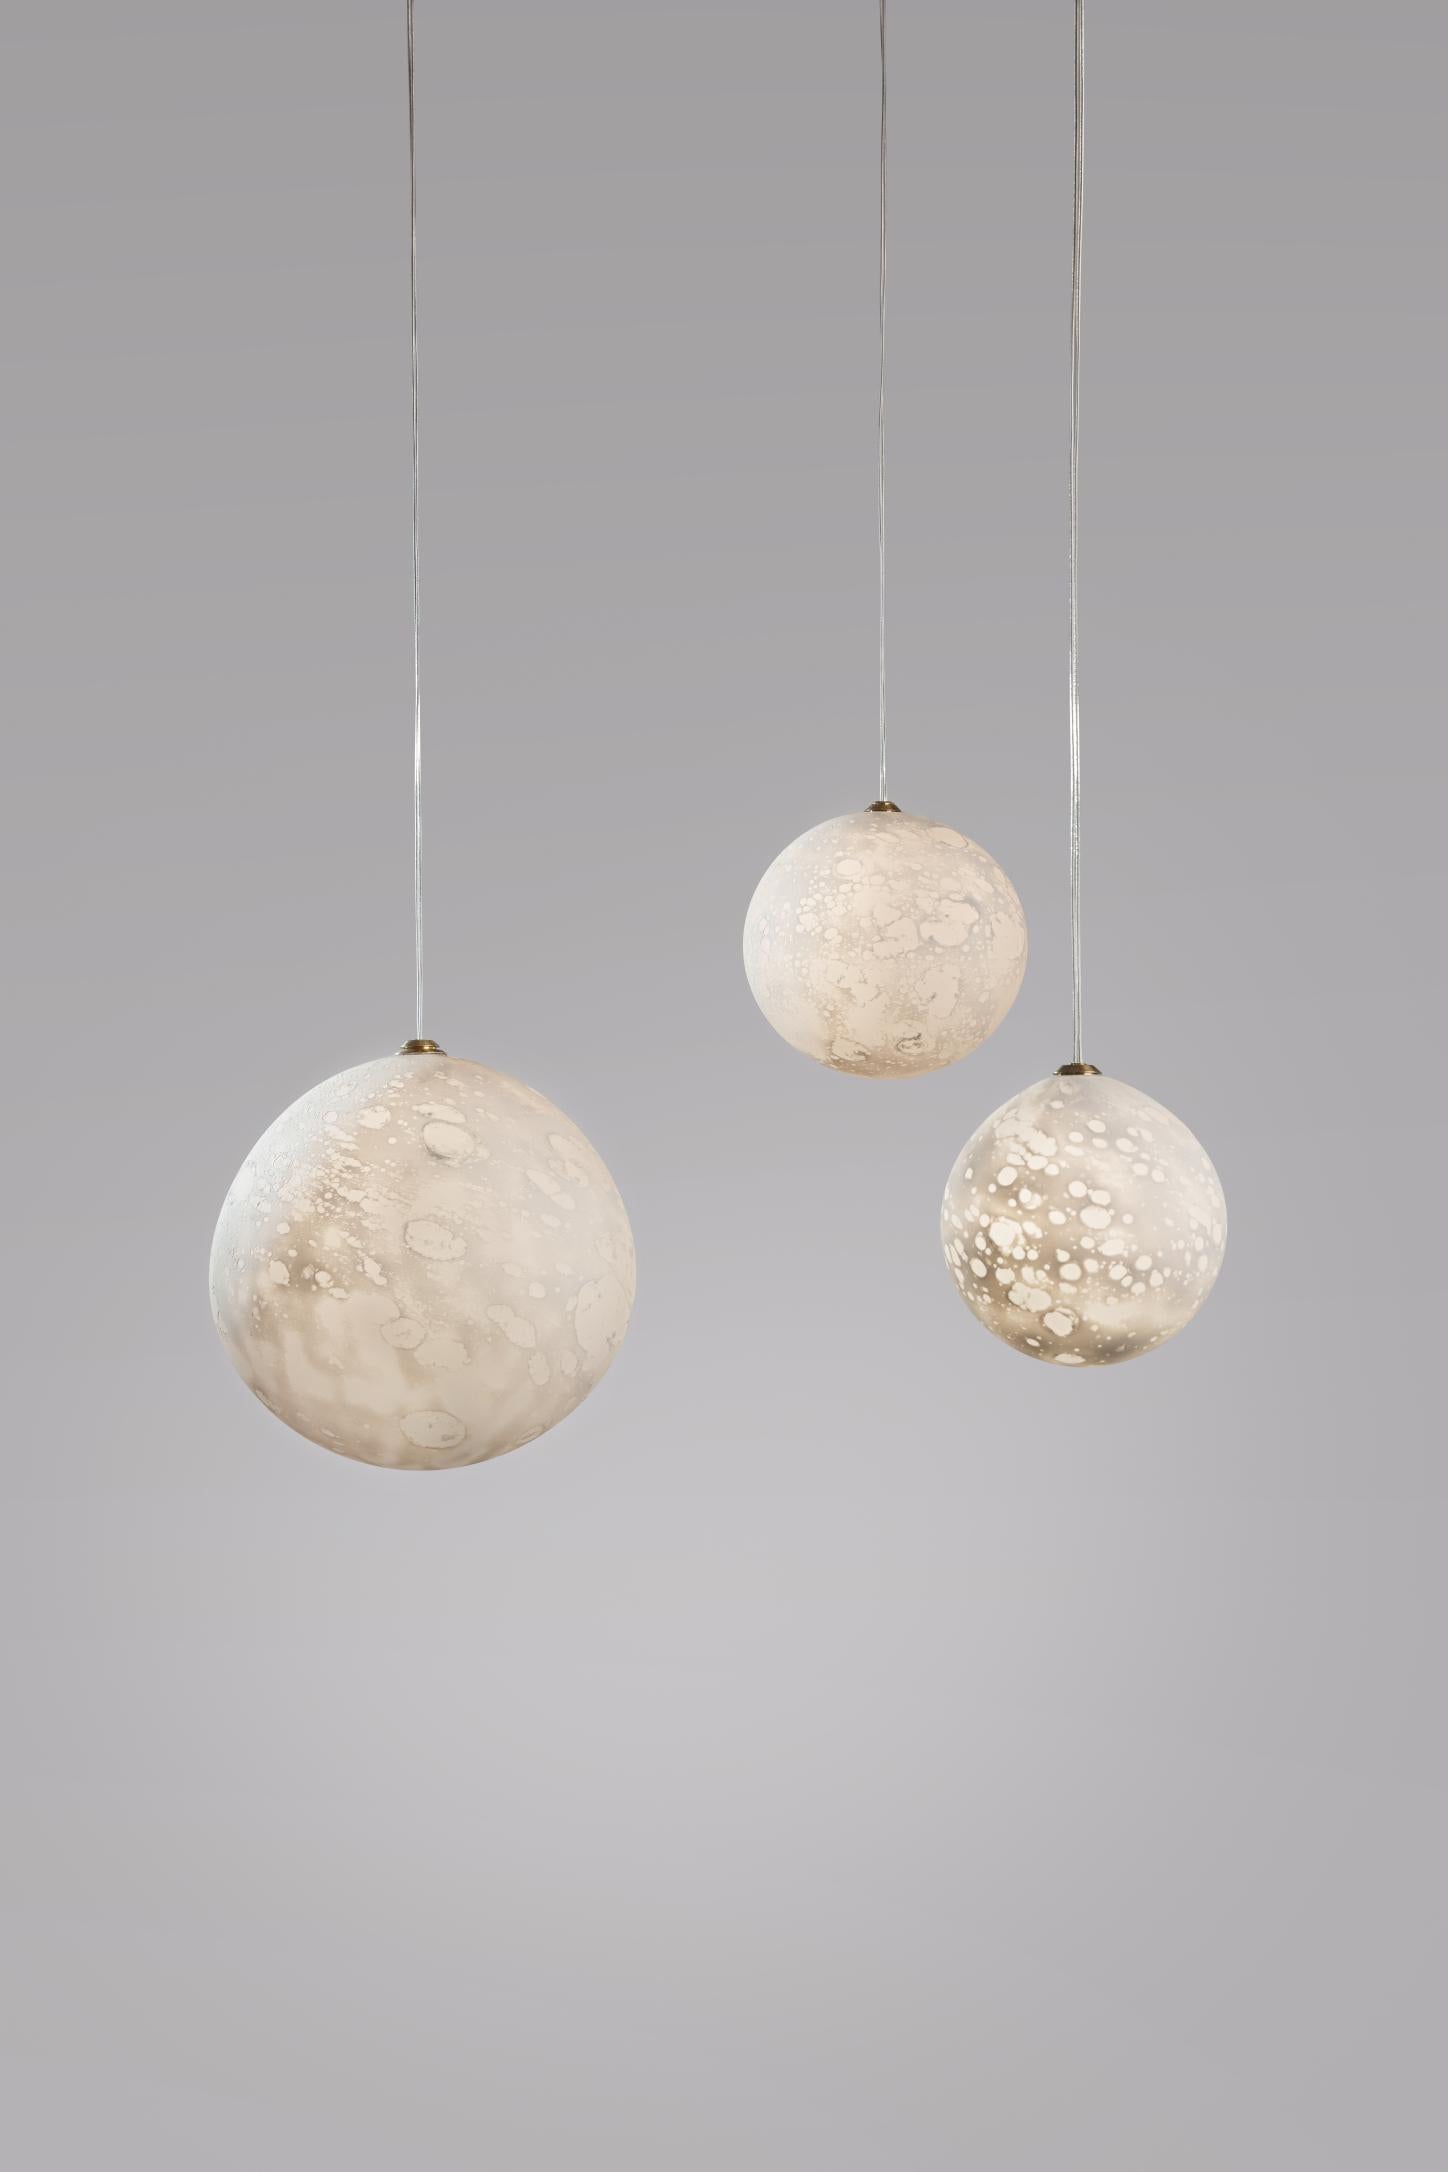 Lunes hanging lights planets, Ludovic Clément d’Armont.
Every creation of Ludovic Clément d’Armont can be made to order in any requested dimensions.
Material: blown glass.
Dimensions of the planets can vary in the following dimensions: 10 cm, 14